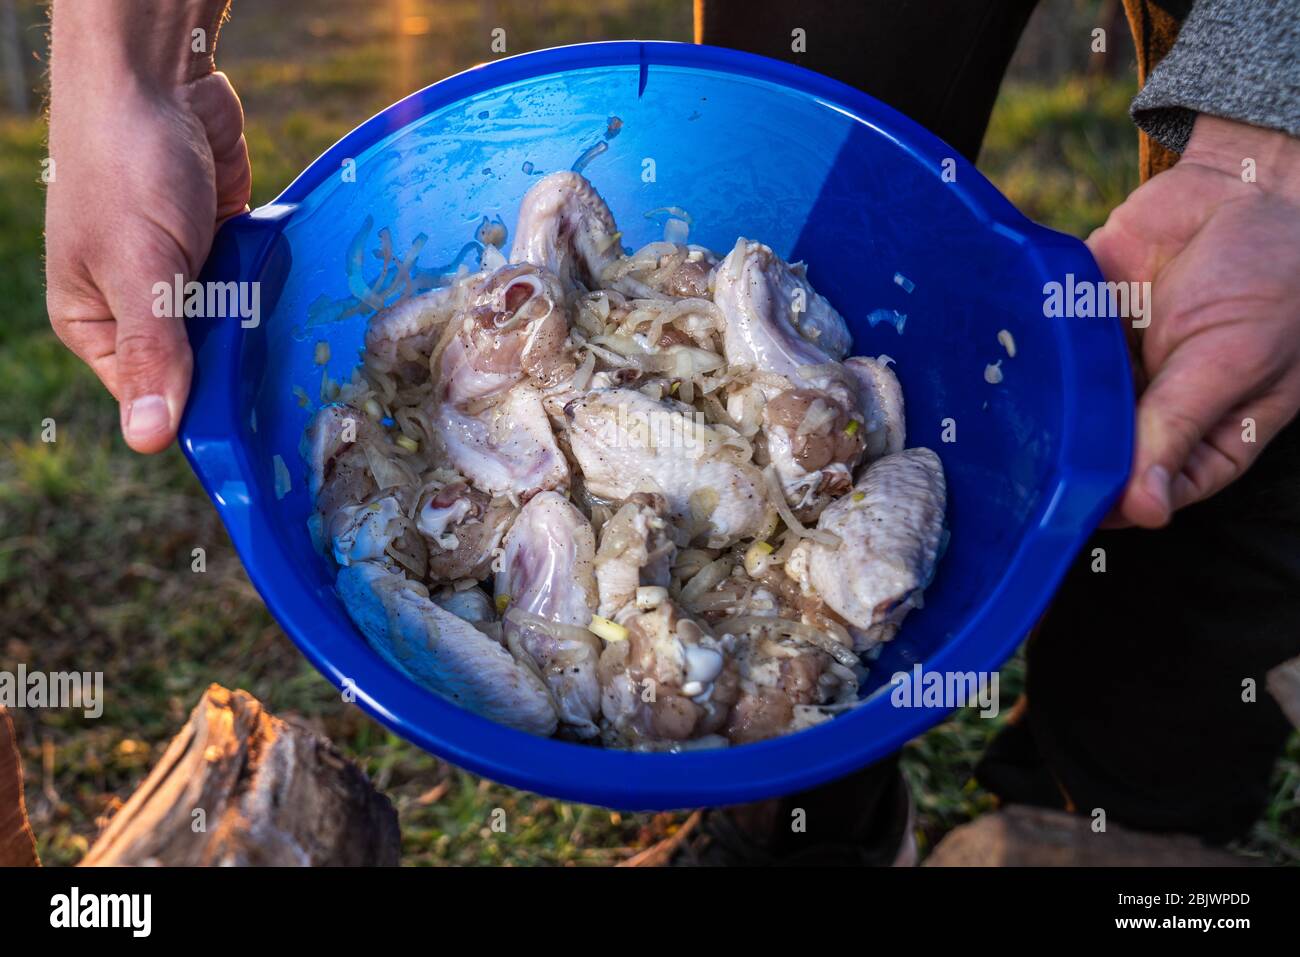 The male handa holds a blue bowl with marinated chicken wings. BBQ and rest Stock Photo